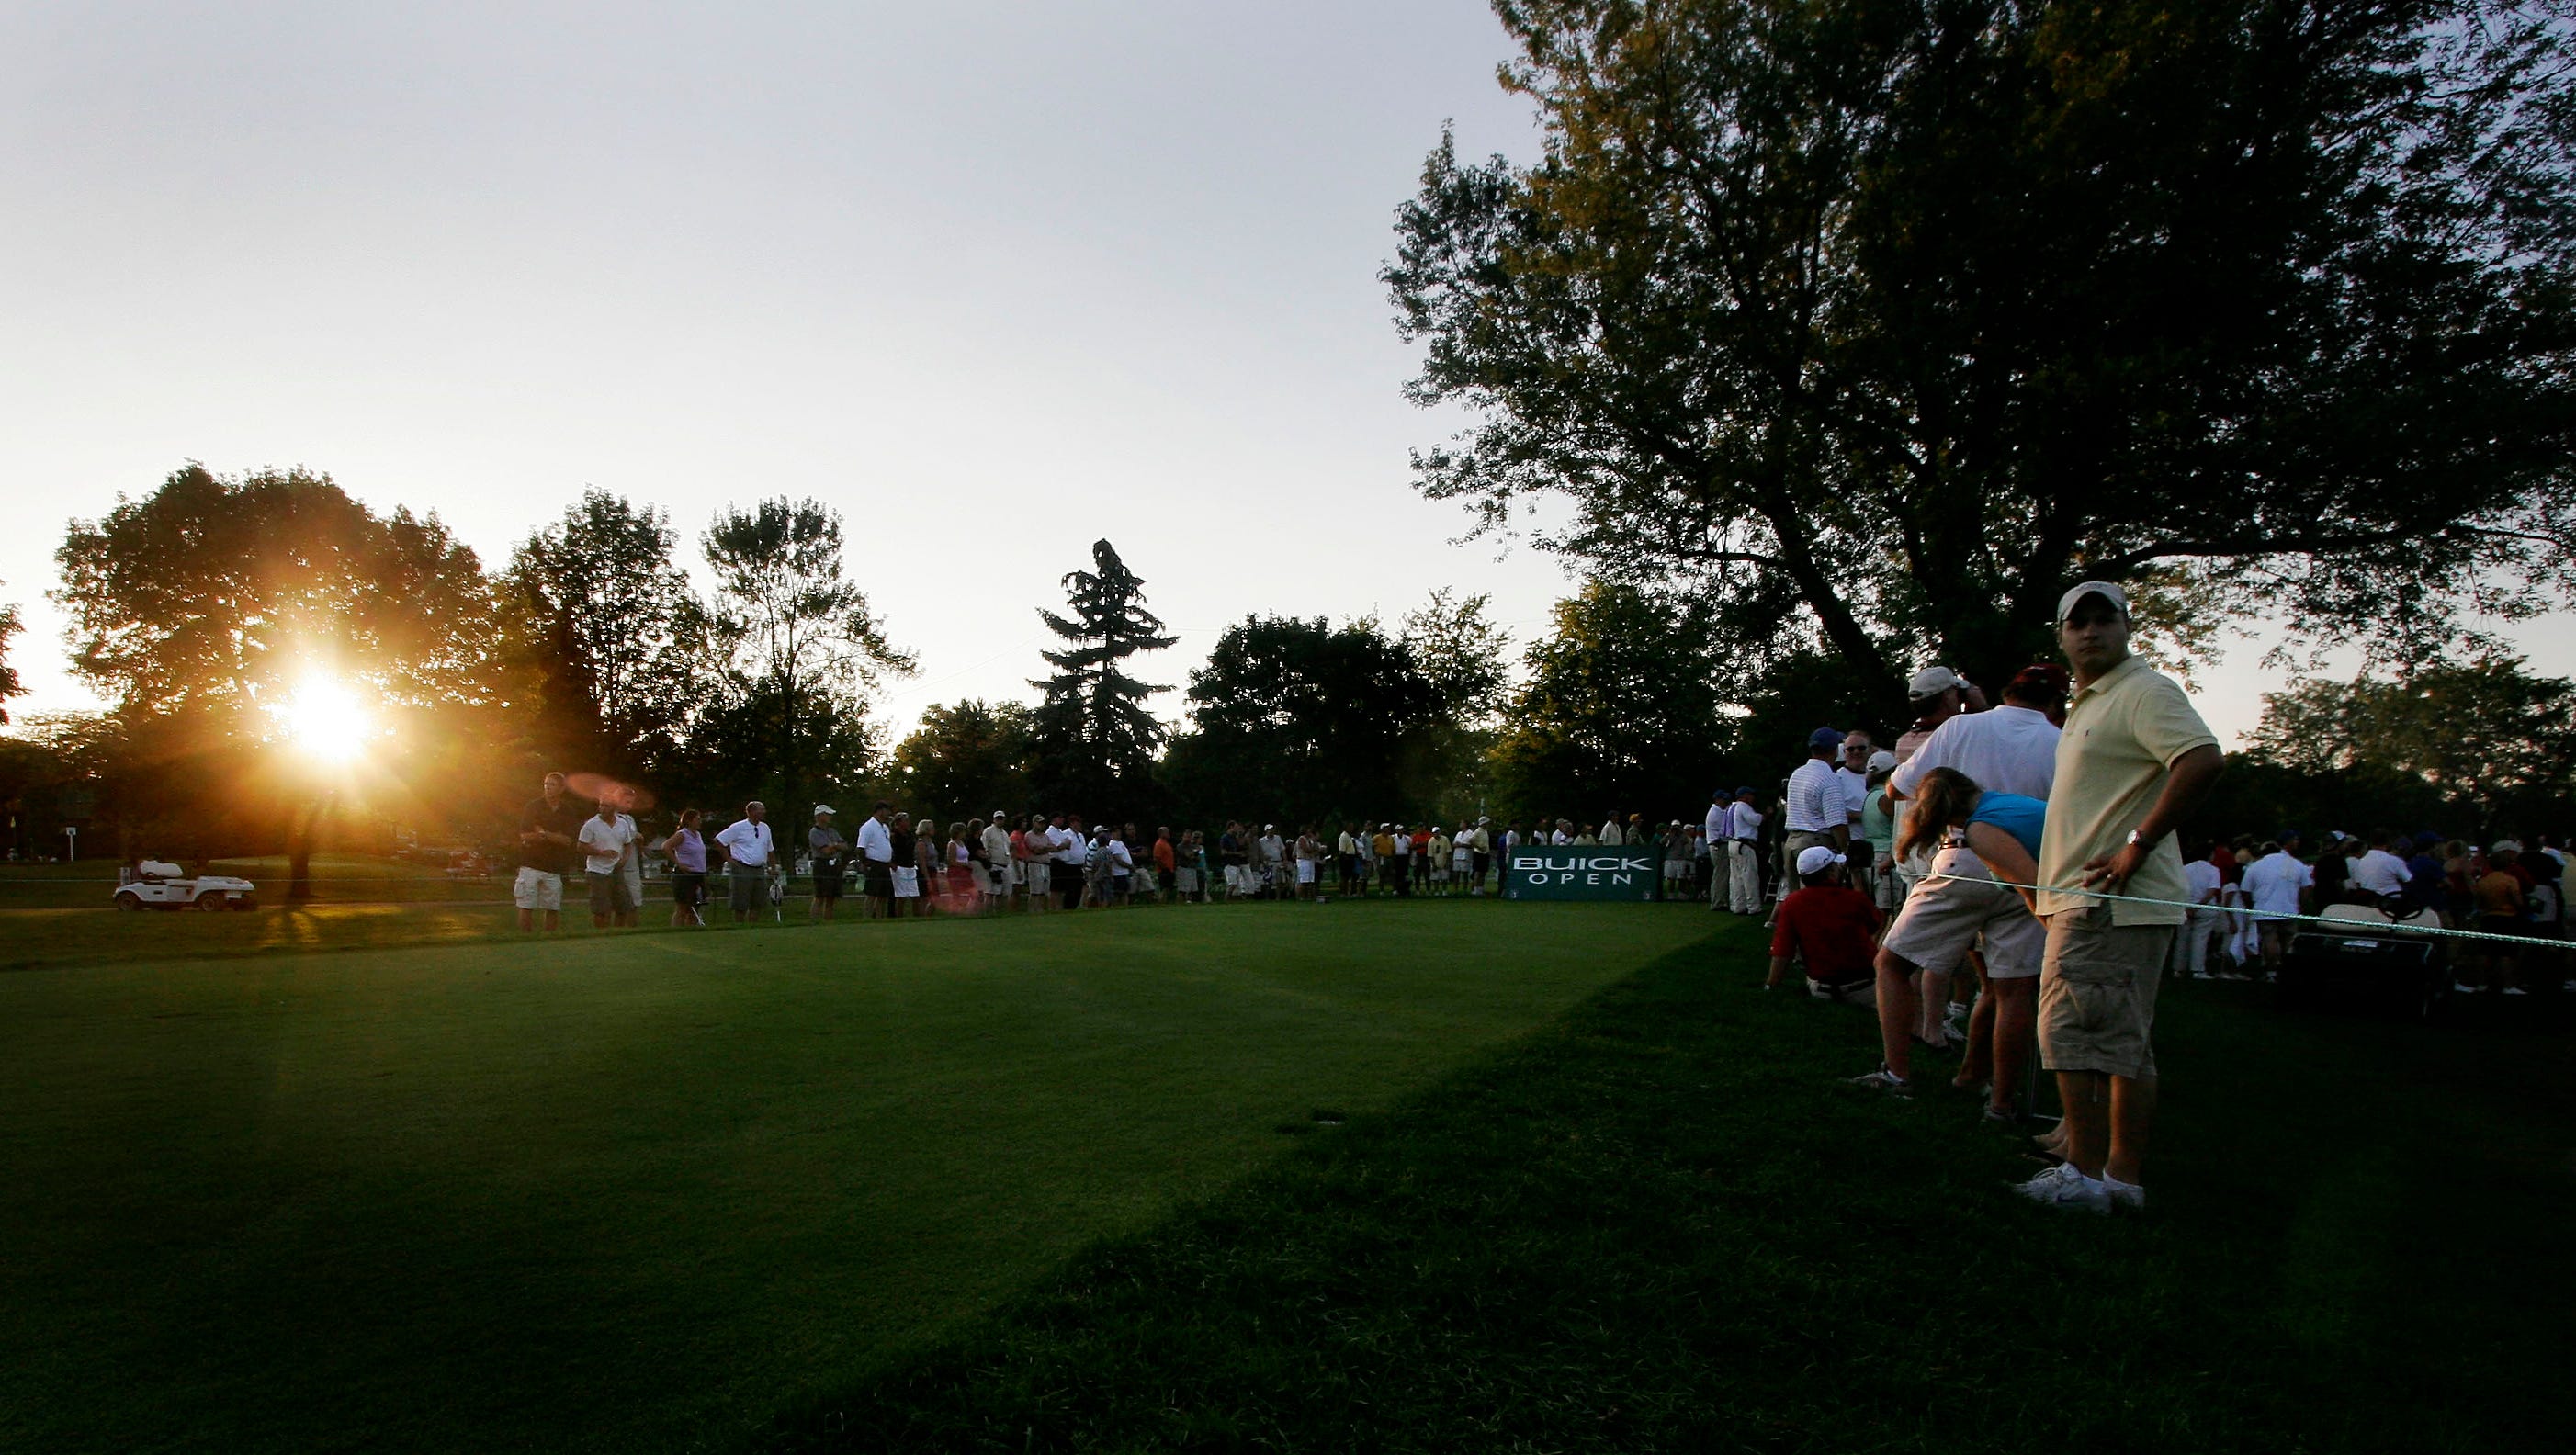 The gallery awaits the arrival of Tiger Woods on the 14th tee at the 2006 Buick Open.